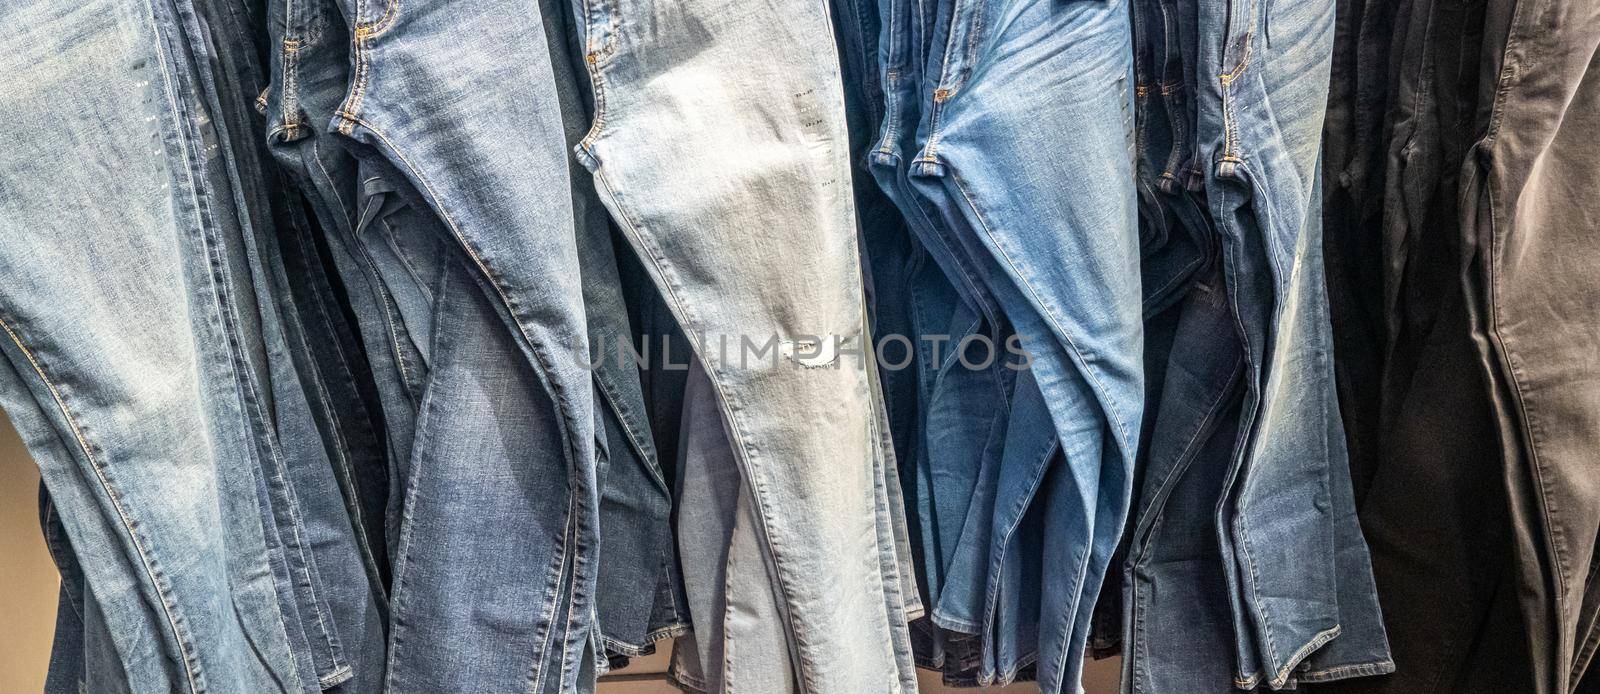 Jeans hanging on a rack. Row of denim pants. concept of buy, sell , shopping and jeans fashion by Mariakray